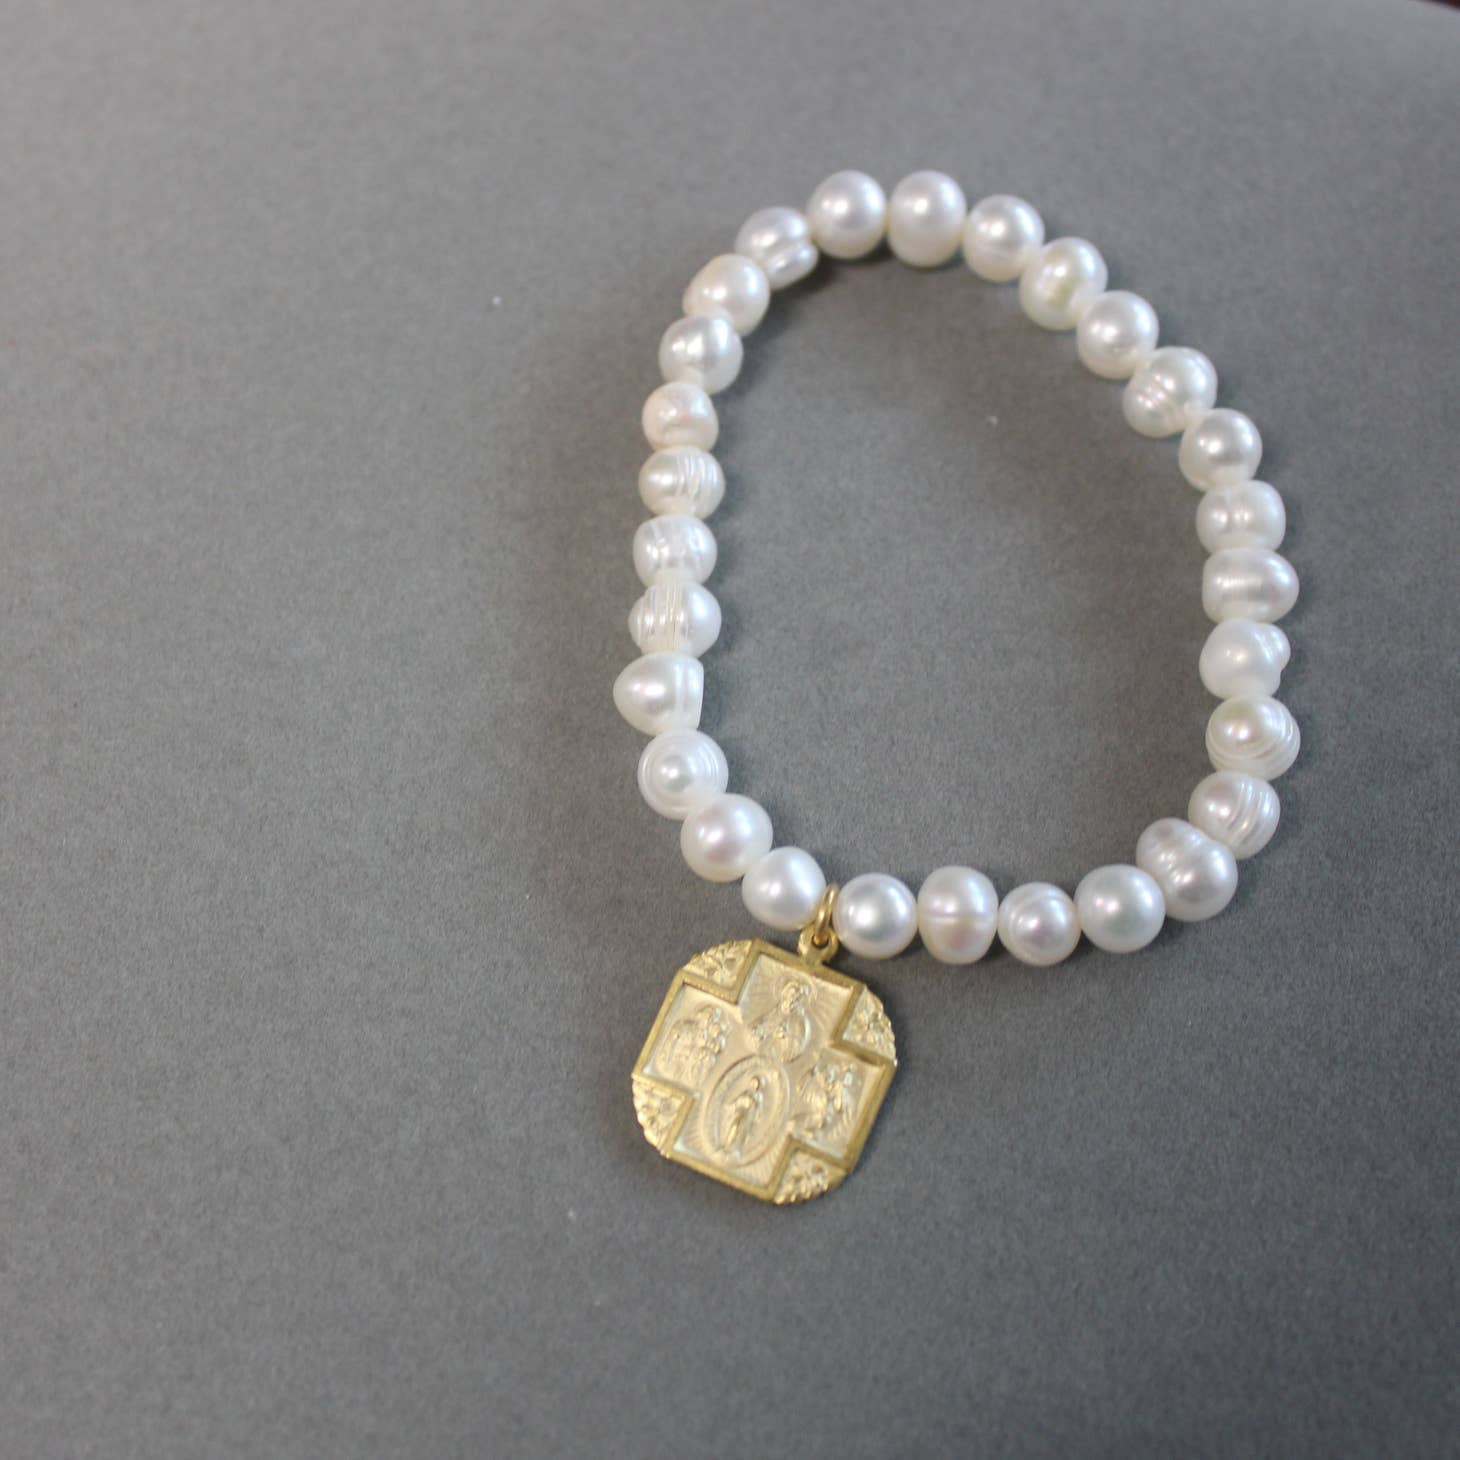 A Pearl Stretch Bracelet with Square 4 Way Cross Medal from Weisinger Designs.